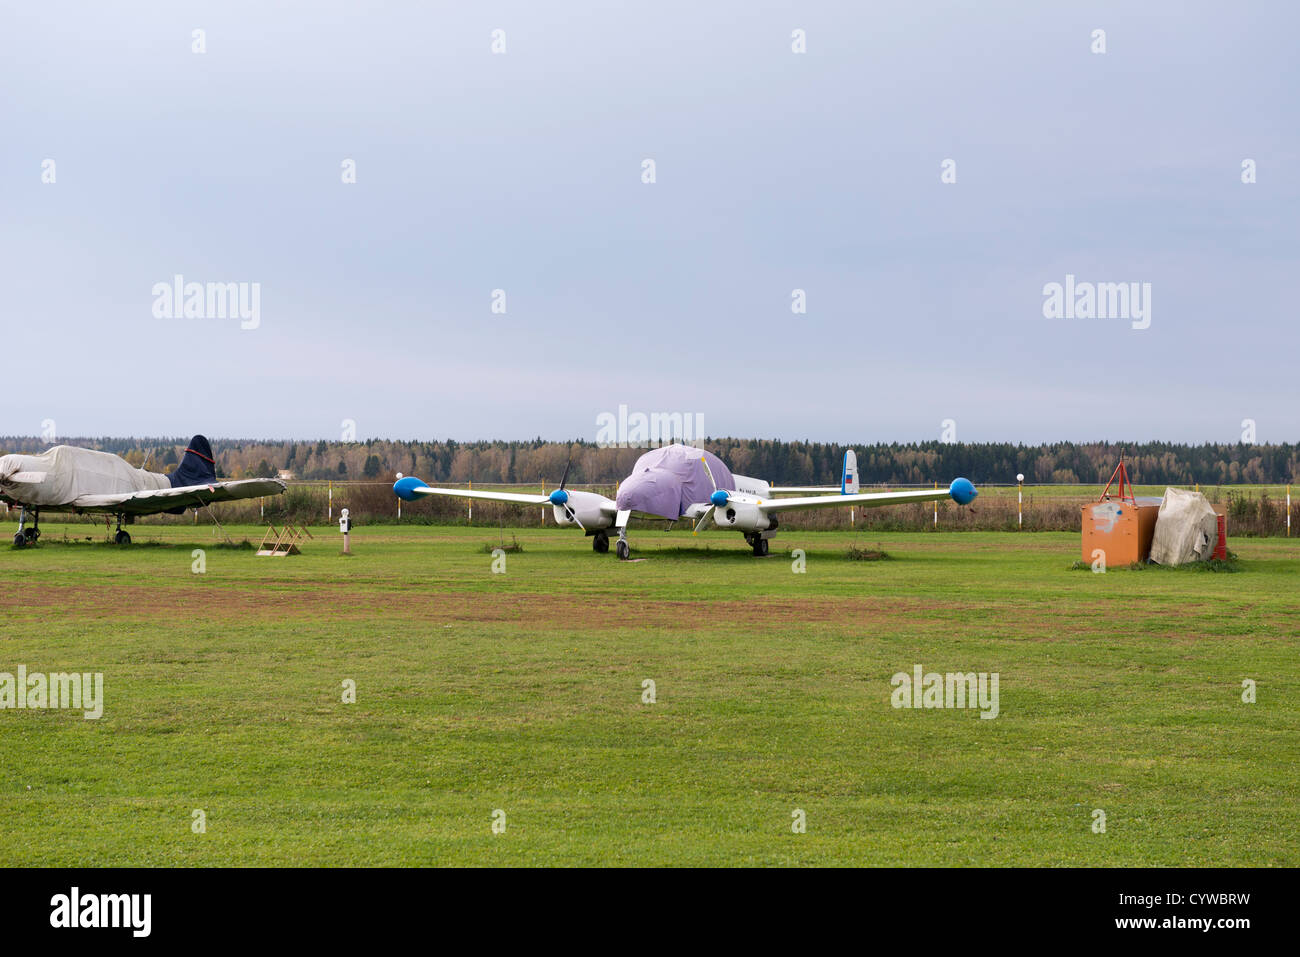 small private aircraft propeller plane airfield airport Stock Photo